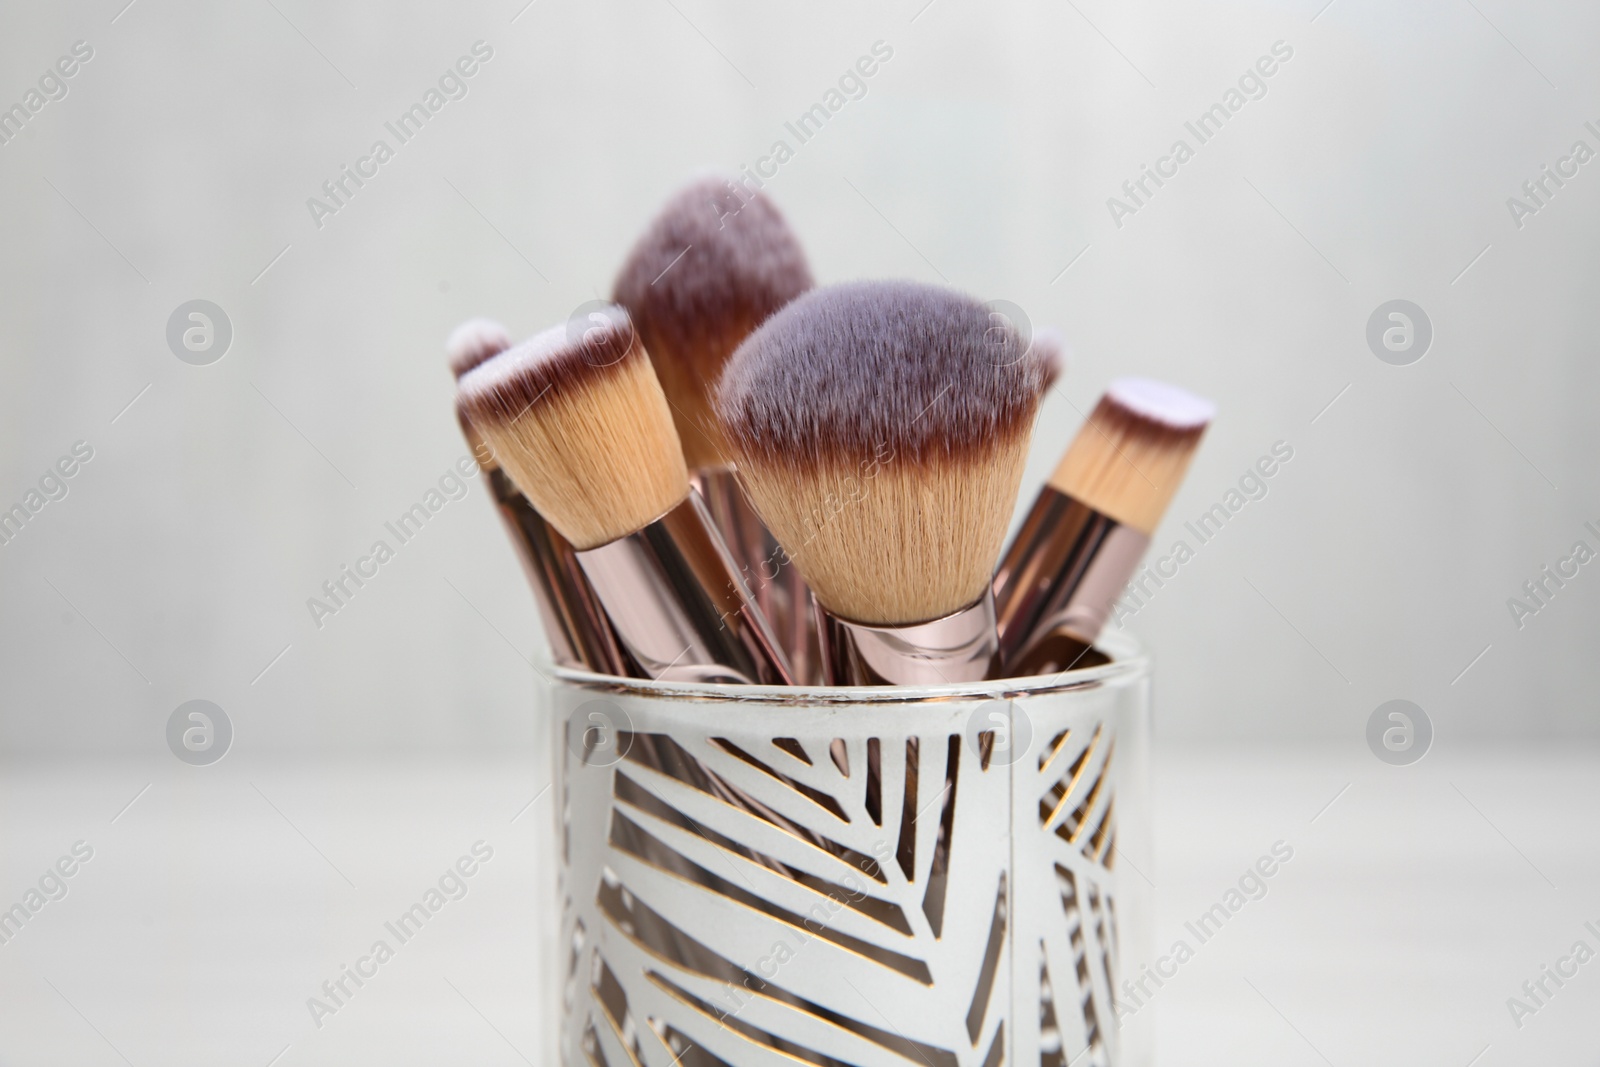 Photo of Organizer with professional makeup brushes against light background, closeup